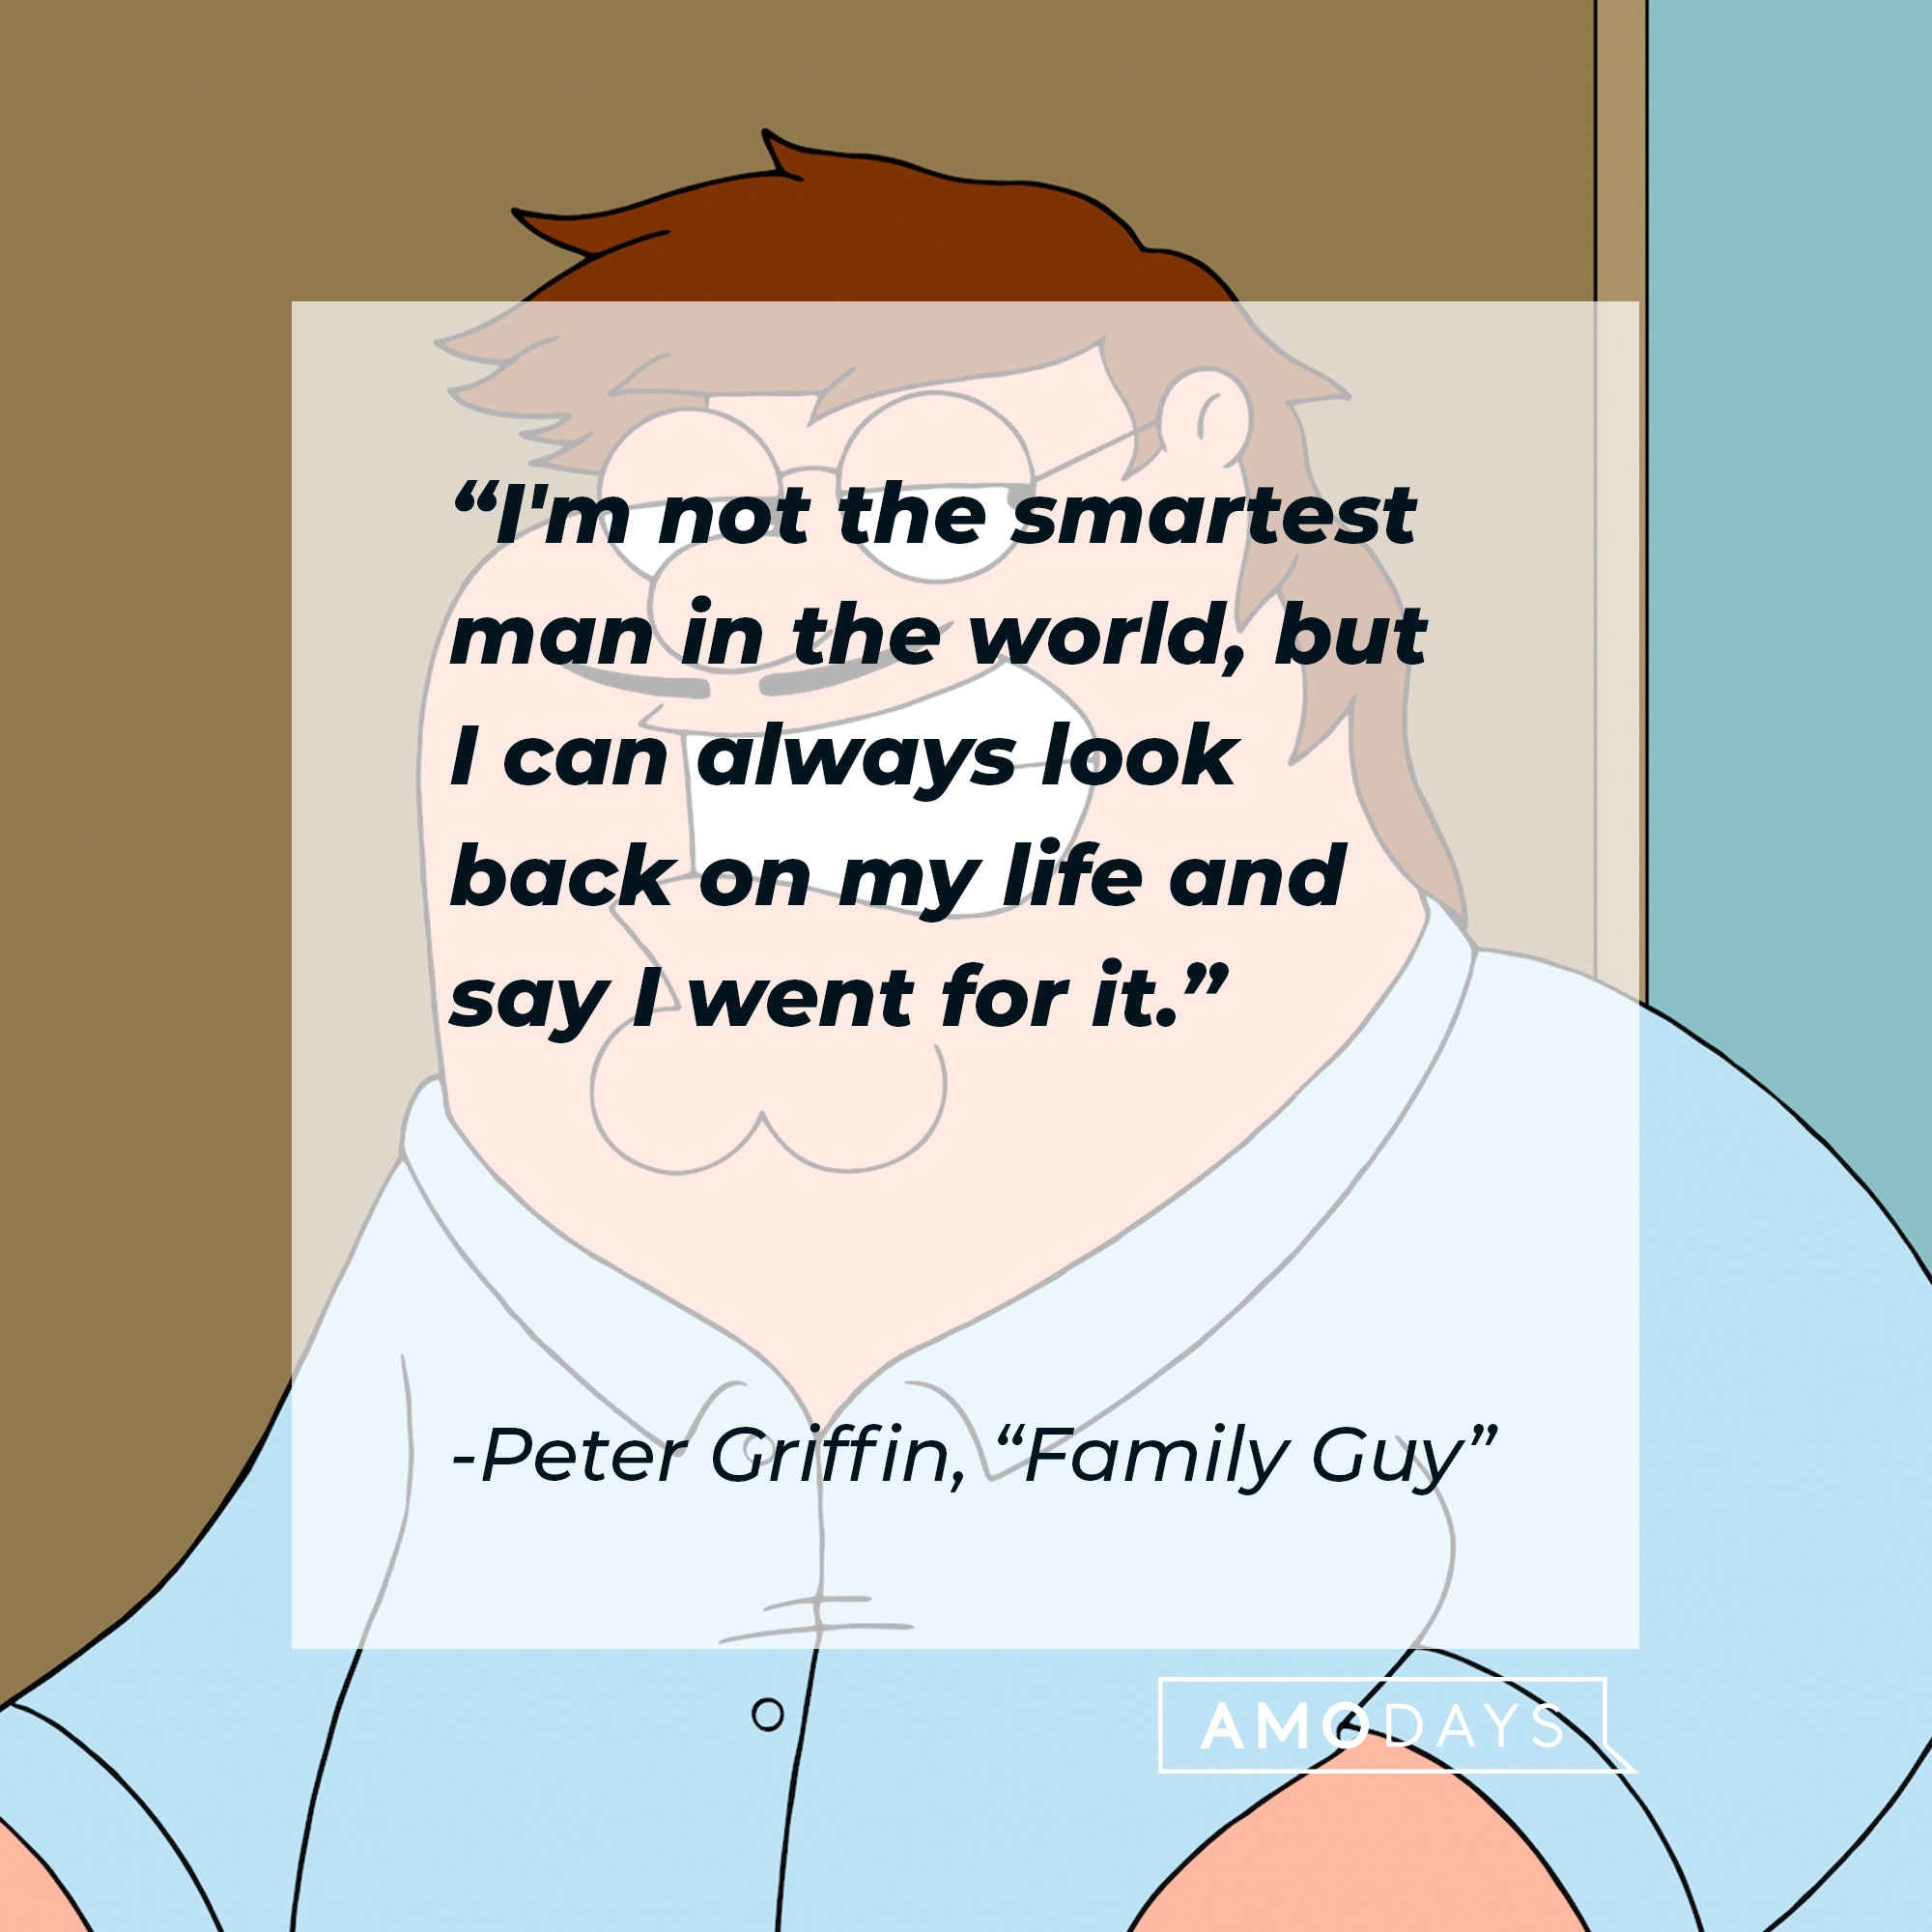 Peter Griffin's quote: "I'm not the smartest man in the world, but I can always look back on my life and say I went for it." | Source: facebook.com/FamilyGuy